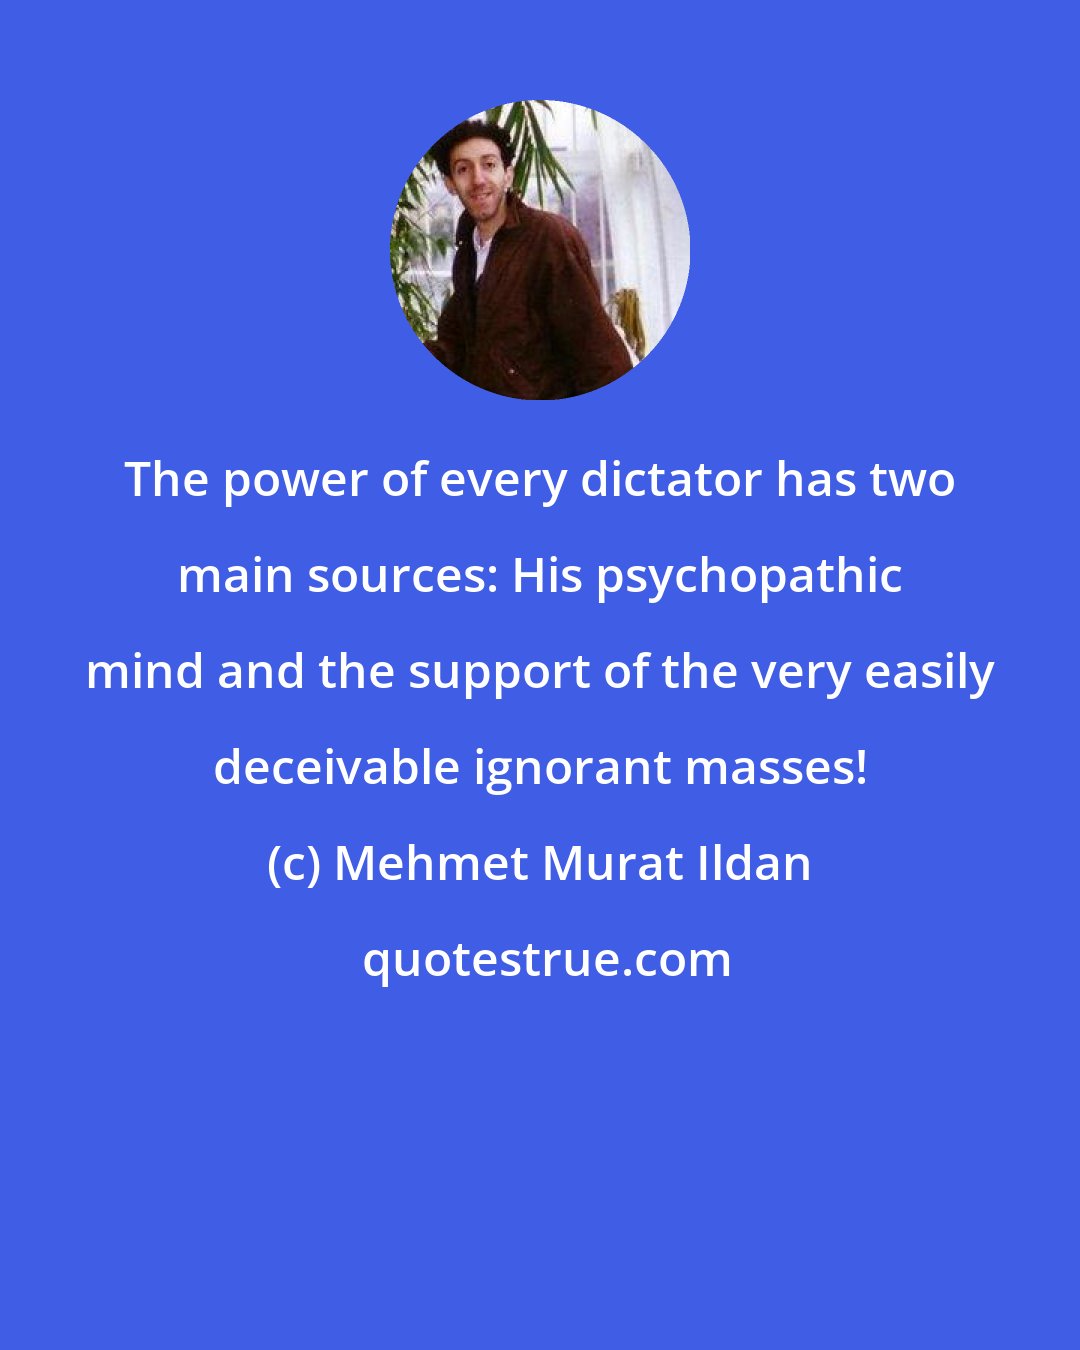 Mehmet Murat Ildan: The power of every dictator has two main sources: His psychopathic mind and the support of the very easily deceivable ignorant masses!